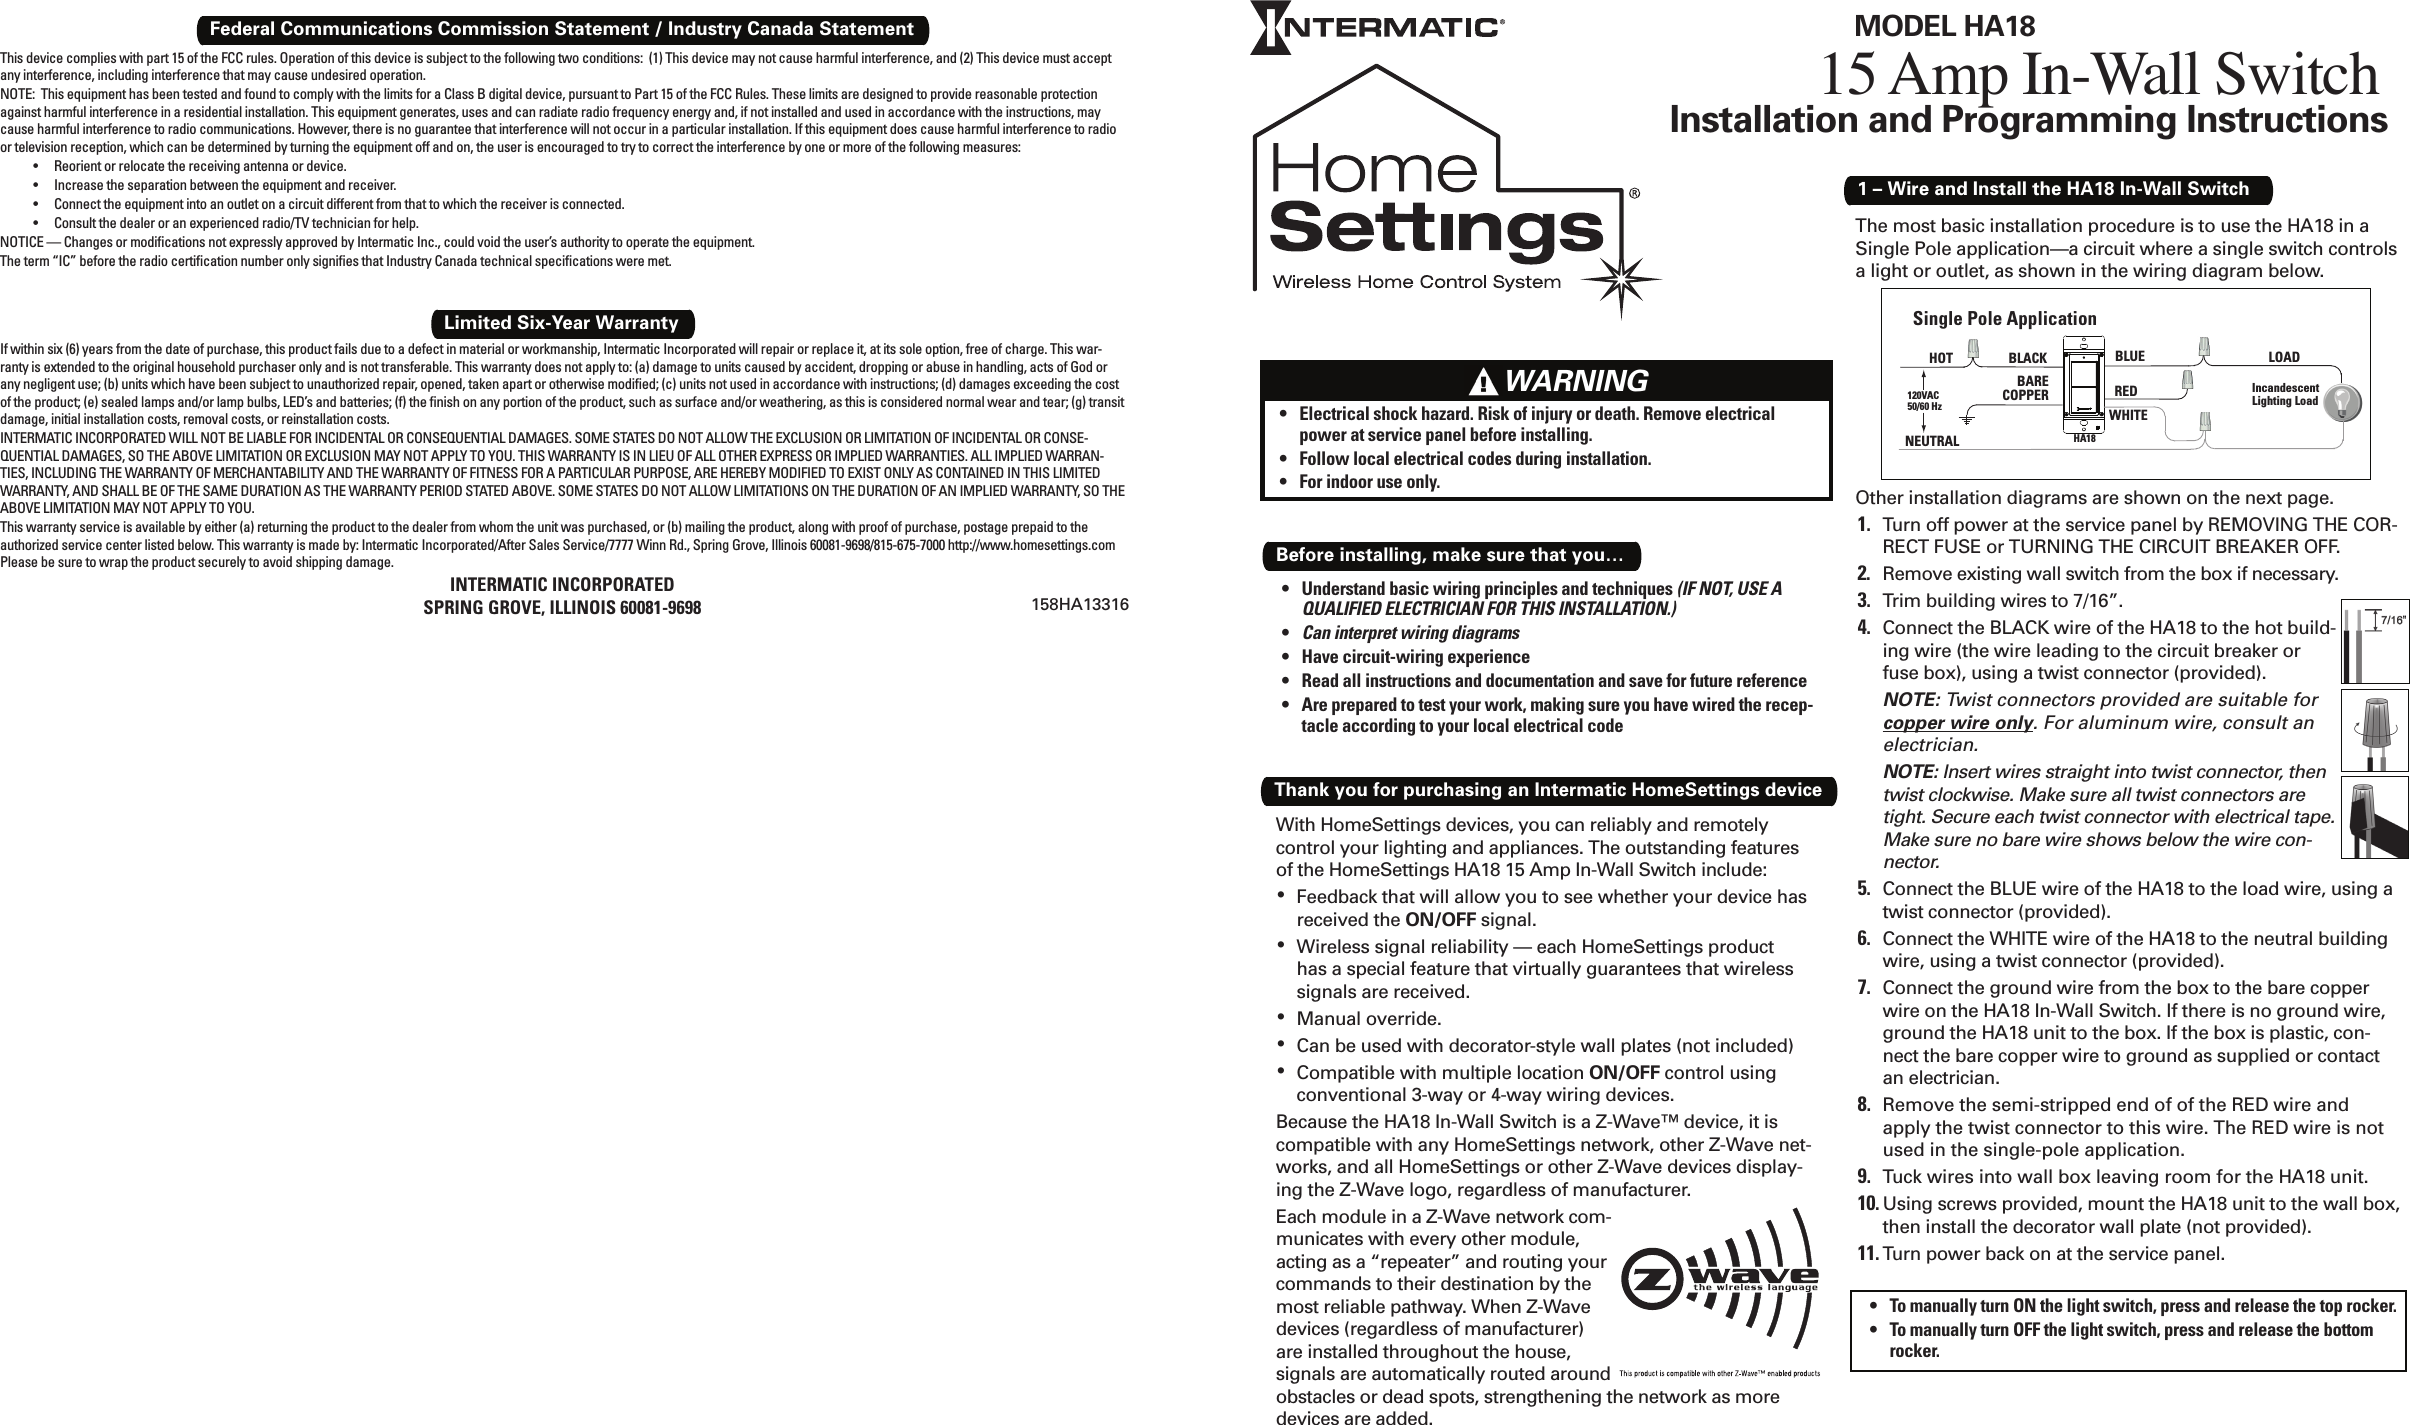 Installation and Programming Instructions1 – Wire and Install the HA18 In-Wall SwitchWith HomeSettings devices, you can reliably and remotely control your lighting and appliances. The outstanding features of the HomeSettings HA18 15 Amp In-Wall Switch include:Feedback that will allow you to see whether your device has • received the ON/OFF signal.Wireless signal reliability — each HomeSettings product • has a special feature that virtually guarantees that wireless signals are received.Manual override.• Can be used with decorator-style wall plates (not included)• Compatible with multiple location •  ON/OFF control using conventional 3-way or 4-way wiring devices.Because the HA18 In-Wall Switch is a Z-Wave™ device, it is compatible with any HomeSettings network, other Z-Wave net-works, and all HomeSettings or other Z-Wave devices display-ing the Z-Wave logo, regardless of manufacturer. Each module in a Z-Wave network com-municates with every other module, acting as a “repeater” and routing your commands to their destination by the most reliable pathway. When Z-Wave devices (regardless of manufacturer) are installed throughout the house, signals are automatically routed around obstacles or dead spots, strengthening the network as more devices are added.Thank you for purchasing an Intermatic HomeSettings deviceThe most basic installation procedure is to use the HA18 in a Single Pole application—a circuit where a single switch controls a light or outlet, as shown in the wiring diagram below.Other installation diagrams are shown on the next page.Turn off power at the service panel by REMOVING THE COR-1. RECT FUSE or TURNING THE CIRCUIT BREAKER OFF.Remove existing wall switch from the box if necessary.2. Trim building wires to 7/16”.3. Connect the BLACK wire of the HA18 to the hot build-4. ing wire (the wire leading to the circuit breaker or fuse box), using a twist connector (provided).NOTE: Twist connectors provided are suitable for copper wire only. For aluminum wire, consult an electrician.NOTE: Insert wires straight into twist connector, then twist clockwise. Make sure all twist connectors are tight. Secure each twist connector with electrical tape. Make sure no bare wire shows below the wire con-nector.Connect the BLUE wire of the HA18 to the load wire, using a 5. twist connector (provided).Connect the WHITE wire of the HA18 to the neutral building 6. wire, using a twist connector (provided).Connect the ground wire from the box to the bare copper 7. wire on the HA18 In-Wall Switch. If there is no ground wire, ground the HA18 unit to the box. If the box is plastic, con-nect the bare copper wire to ground as supplied or contact an electrician.Remove the semi-stripped end of of the RED wire and 8. apply the twist connector to this wire. The RED wire is not used in the single-pole application.Tuck wires into wall box leaving room for the HA18 unit.9. Using screws provided, mount the HA18 unit to the wall box, 10. then install the decorator wall plate (not provided).Turn power back on at the service panel.11. Single Pole ApplicationNEUTRALHOT BLACK BLUE120VAC50/60 HzIncandescentLighting LoadBARECOPPERLOADHA18REDWHITETo manually turn ON the light switch, press and release the top rocker.• To manually turn OFF the light switch, press and release the bottom • rocker.15 Amp In-Wall SwitchMODEL HA18Understand basic wiring principles and techniques •  (IF NOT, USE A QUALIFIED ELECTRICIAN FOR THIS INSTALLATION.)Can interpret wiring diagrams• Have circuit-wiring experience• Read all instructions and documentation and save for future reference• Are prepared to test your work, making sure you have wired the recep-• tacle according to your local electrical codeBefore installing, make sure that you…If within six (6) years from the date of purchase, this product fails due to a defect in material or workmanship, Intermatic Incorporated will repair or replace it, at its sole option, free of charge. This war-ranty is extended to the original household purchaser only and is not transferable. This warranty does not apply to: (a) damage to units caused by accident, dropping or abuse in handling, acts of God or any negligent use; (b) units which have been subject to unauthorized repair, opened, taken apart or otherwise modiﬁ ed; (c) units not used in accordance with instructions; (d) damages exceeding the cost of the product; (e) sealed lamps and/or lamp bulbs, LED’s and batteries; (f) the ﬁ nish on any portion of the product, such as surface and/or weathering, as this is considered normal wear and tear; (g) transit damage, initial installation costs, removal costs, or reinstallation costs.INTERMATIC INCORPORATED WILL NOT BE LIABLE FOR INCIDENTAL OR CONSEQUENTIAL DAMAGES. SOME STATES DO NOT ALLOW THE EXCLUSION OR LIMITATION OF INCIDENTAL OR CONSE-QUENTIAL DAMAGES, SO THE ABOVE LIMITATION OR EXCLUSION MAY NOT APPLY TO YOU. THIS WARRANTY IS IN LIEU OF ALL OTHER EXPRESS OR IMPLIED WARRANTIES. ALL IMPLIED WARRAN-TIES, INCLUDING THE WARRANTY OF MERCHANTABILITY AND THE WARRANTY OF FITNESS FOR A PARTICULAR PURPOSE, ARE HEREBY MODIFIED TO EXIST ONLY AS CONTAINED IN THIS LIMITED WARRANTY, AND SHALL BE OF THE SAME DURATION AS THE WARRANTY PERIOD STATED ABOVE. SOME STATES DO NOT ALLOW LIMITATIONS ON THE DURATION OF AN IMPLIED WARRANTY, SO THE ABOVE LIMITATION MAY NOT APPLY TO YOU.This warranty service is available by either (a) returning the product to the dealer from whom the unit was purchased, or (b) mailing the product, along with proof of purchase, postage prepaid to the authorized service center listed below. This warranty is made by: Intermatic Incorporated/After Sales Service/7777 Winn Rd., Spring Grove, Illinois 60081-9698/815-675-7000 http://www.homesettings.com Please be sure to wrap the product securely to avoid shipping damage.INTERMATIC INCORPORATEDSPRING GROVE, ILLINOIS 60081-9698Limited Six-Year WarrantyFederal Communications Commission Statement / Industry Canada StatementThis device complies with part 15 of the FCC rules. Operation of this device is subject to the following two conditions:  (1) This device may not cause harmful interference, and (2) This device must accept any interference, including interference that may cause undesired operation.NOTE:  This equipment has been tested and found to comply with the limits for a Class B digital device, pursuant to Part 15 of the FCC Rules. These limits are designed to provide reasonable protection against harmful interference in a residential installation. This equipment generates, uses and can radiate radio frequency energy and, if not installed and used in accordance with the instructions, may cause harmful interference to radio communications. However, there is no guarantee that interference will not occur in a particular installation. If this equipment does cause harmful interference to radio or television reception, which can be determined by turning the equipment off and on, the user is encouraged to try to correct the interference by one or more of the following measures:Reorient or relocate the receiving antenna or device.• Increase the separation between the equipment and receiver.• Connect the equipment into an outlet on a circuit different from that to which the receiver is connected.• Consult the dealer or an experienced radio/TV technician for help.• NOTICE — Changes or modiﬁ cations not expressly approved by Intermatic Inc., could void the user’s authority to operate the equipment.The term “IC” before the radio certiﬁ cation number only signiﬁ es that Industry Canada technical speciﬁ cations were met.158HA13316Electrical shock hazard. Risk of injury or death. Remove electrical • power at service panel before installing.Follow local electrical codes during installation.• For indoor use only.•       WARNING